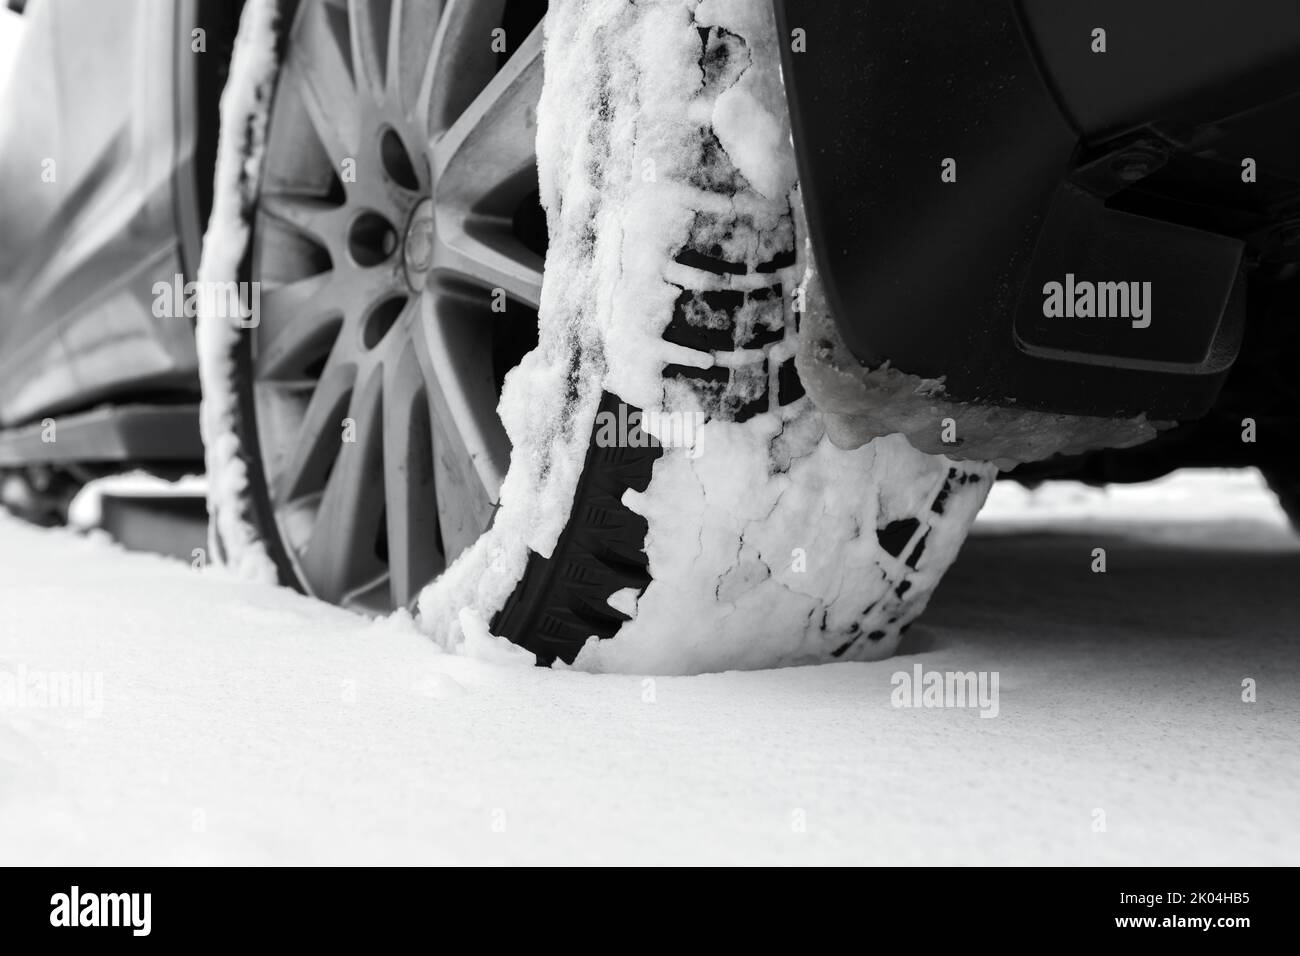 Close-up photo of snowy car wheel on snow tire with metal studs Stock Photo